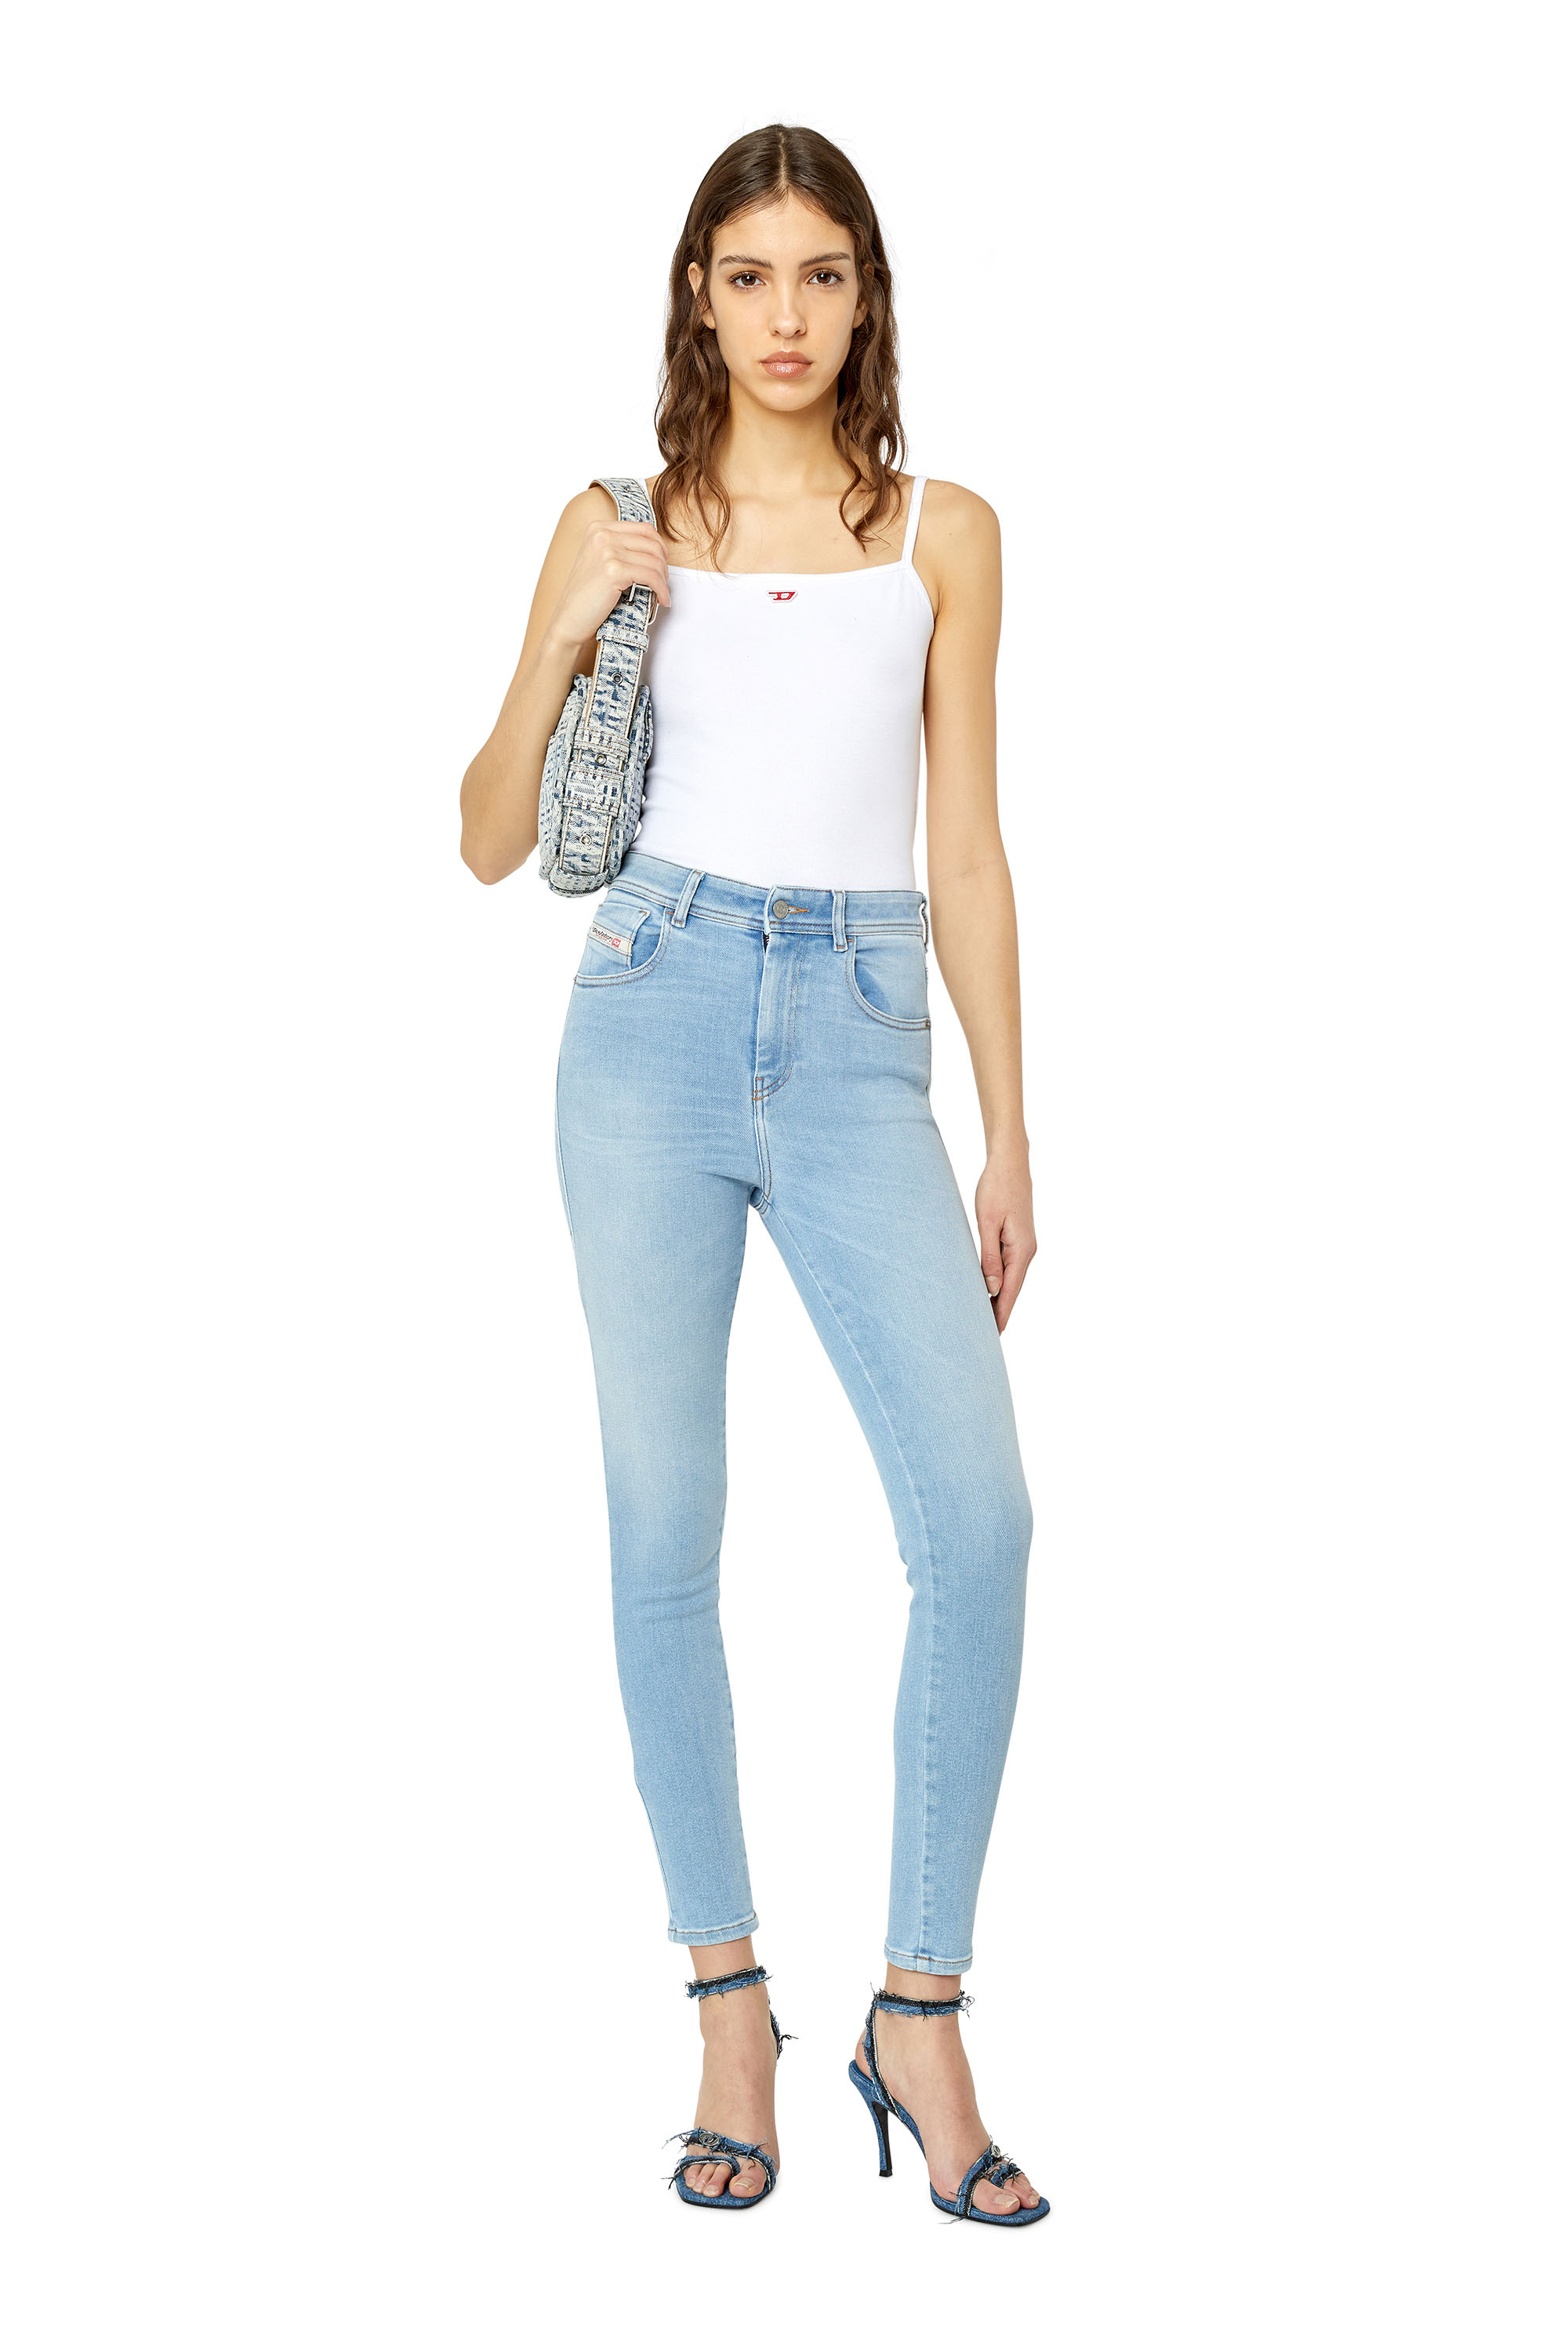 punto final pasaporte Despido Diesel Women Jeans and Apparel: New Collection | Diesel®